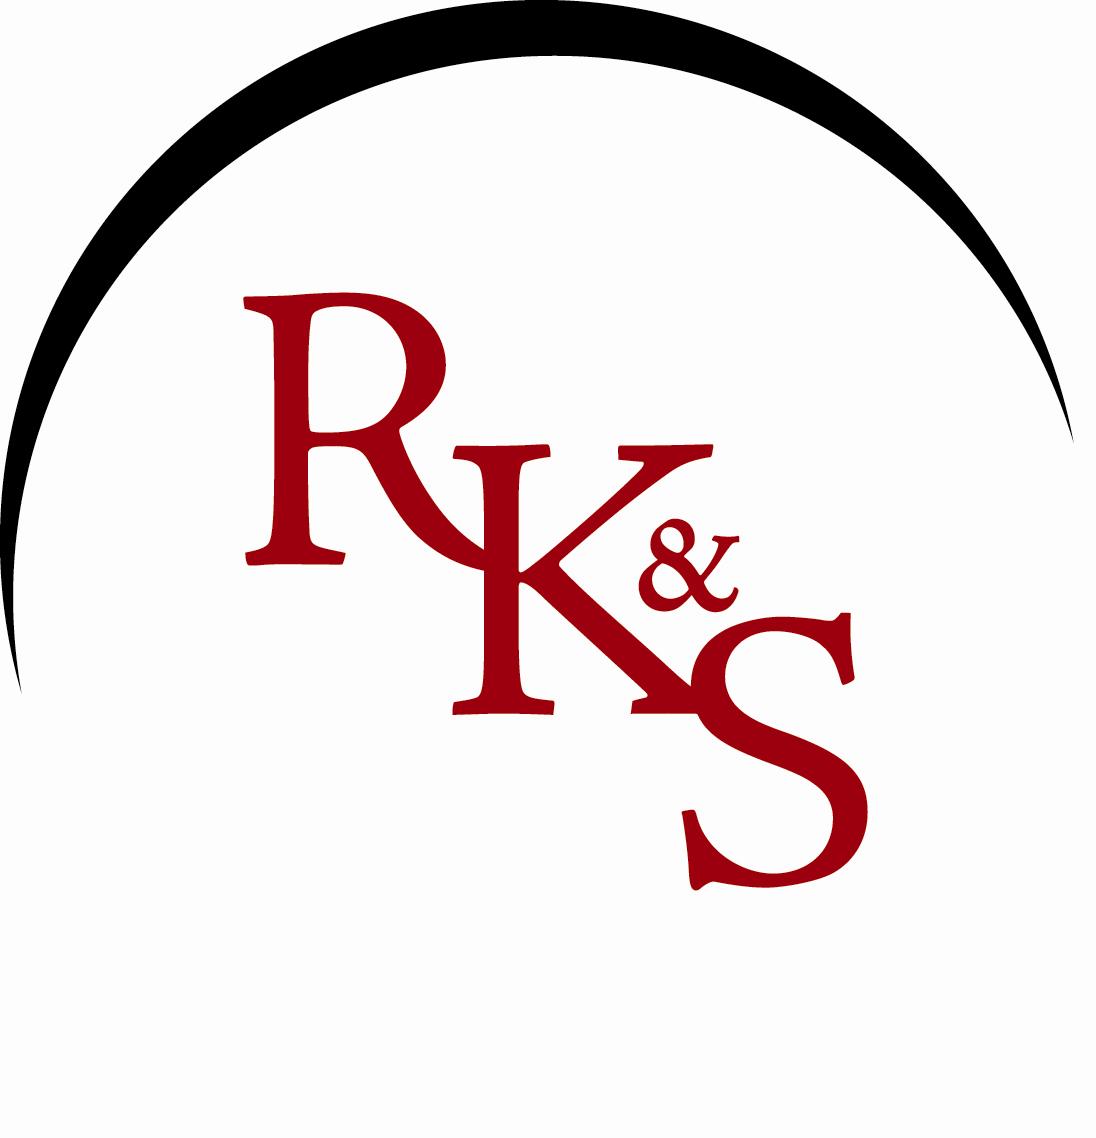 Roger Keith & Sons Insurance